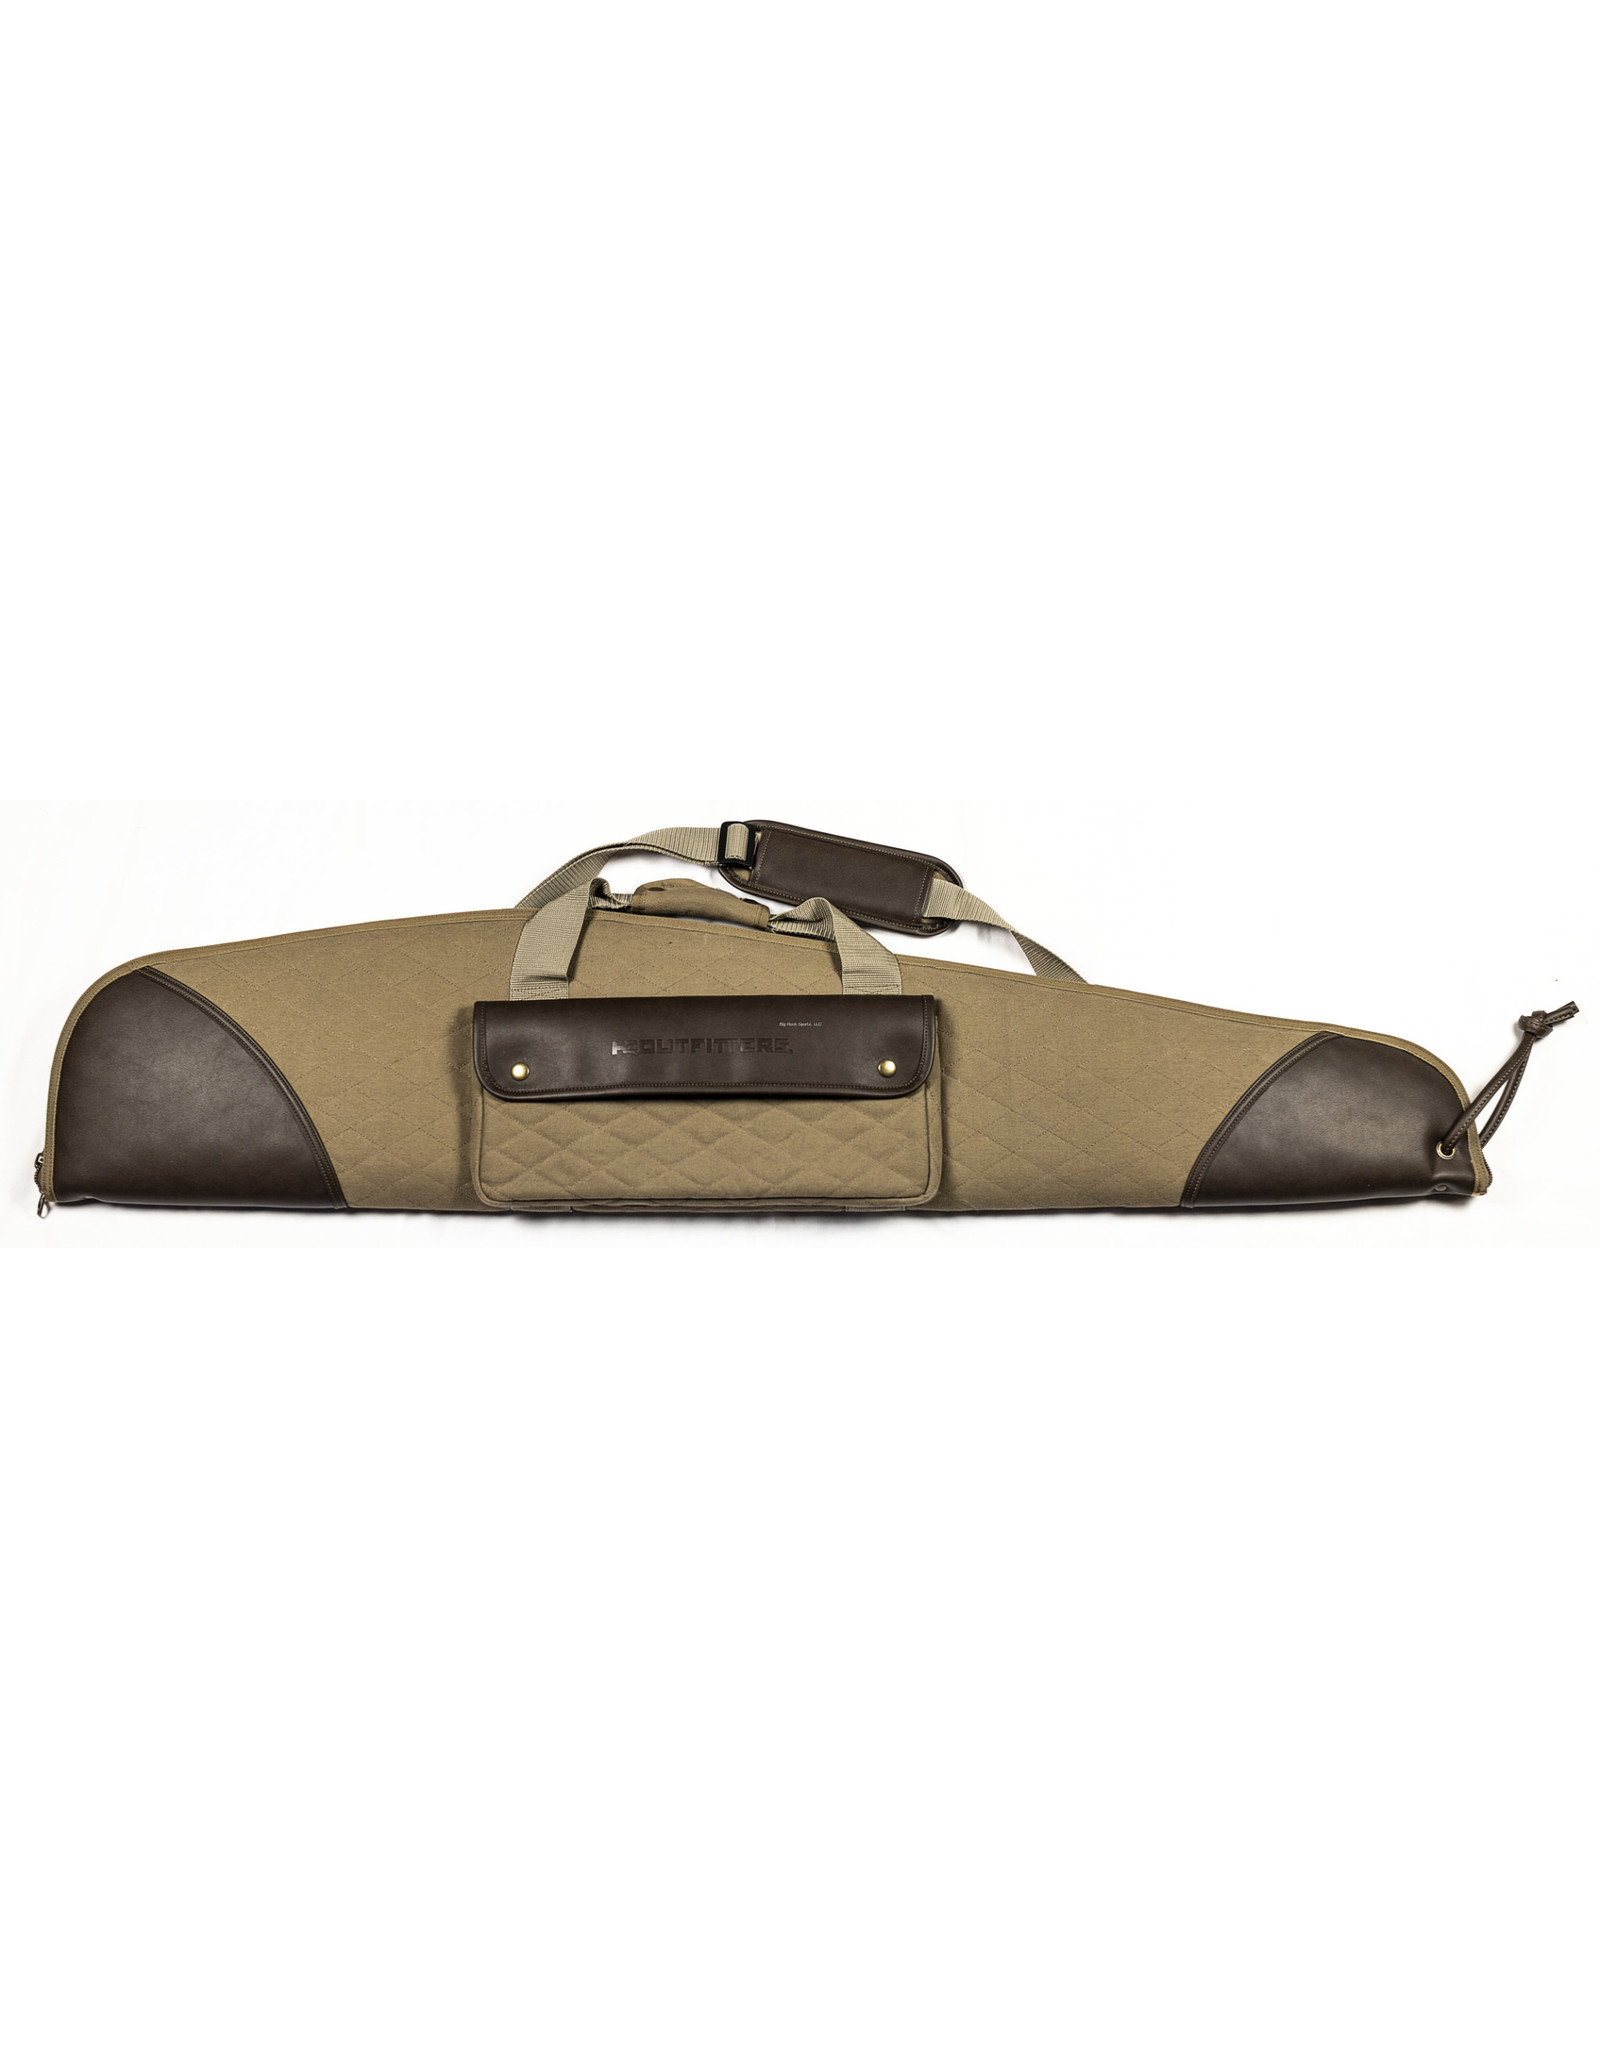 HQ Outfitters HQ Outfitters HQ-CRC48 Classic Canvas Rifle Case, Scoped, 48"